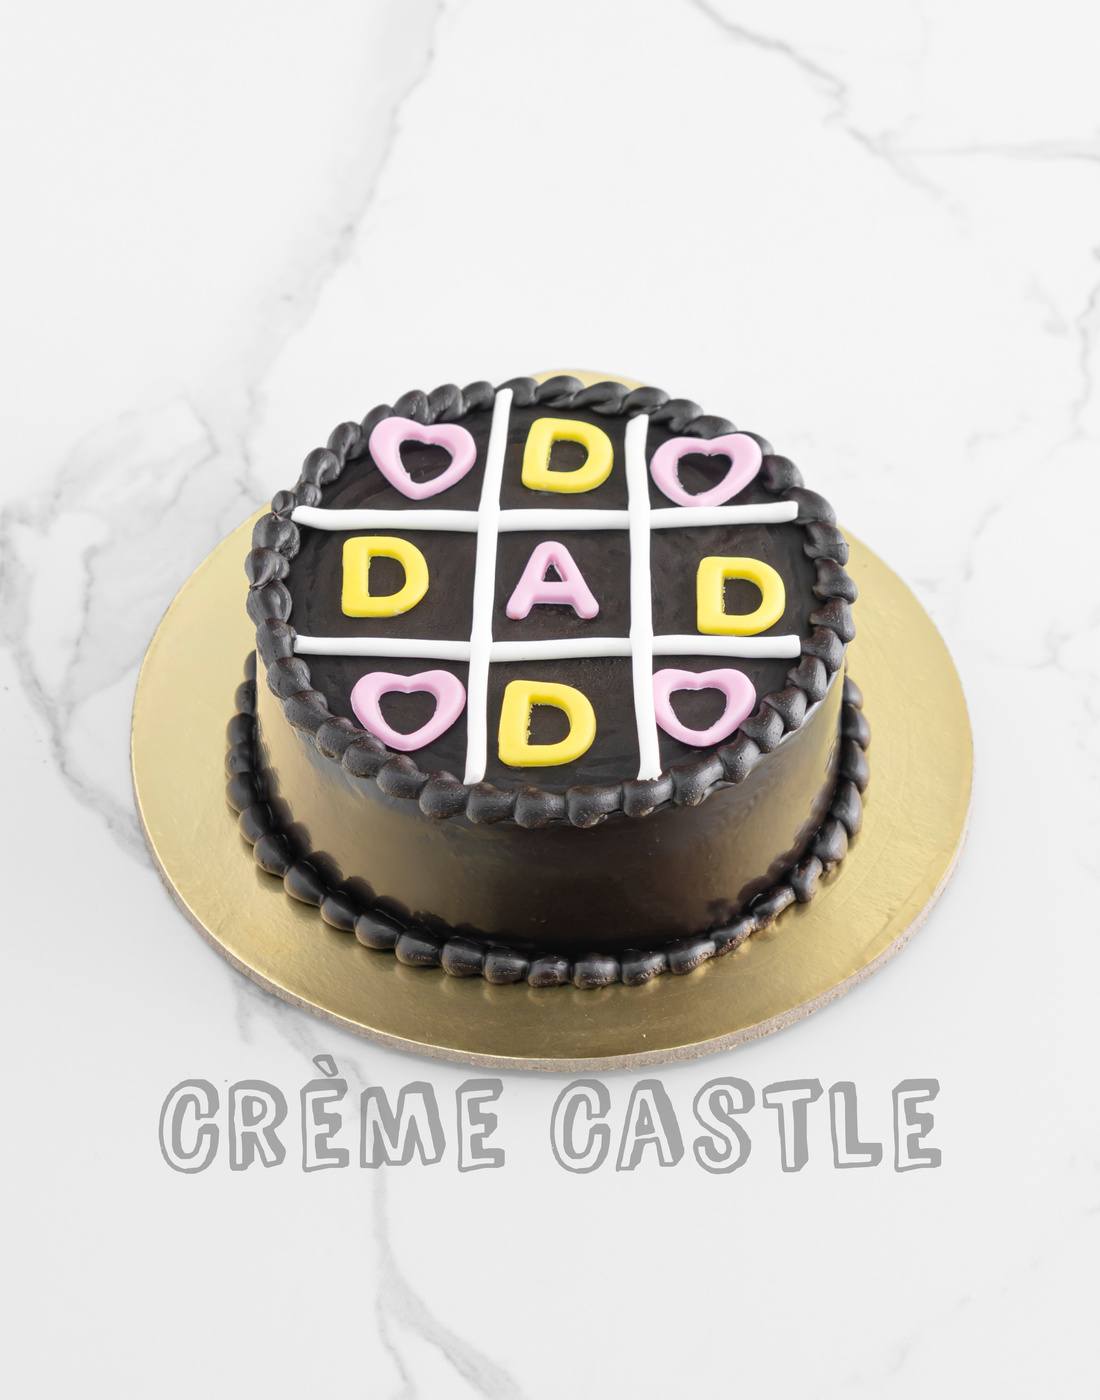 Dad Crossword Cake. Cake for Fathers Day. Noida & Gurgaon – Creme Castle